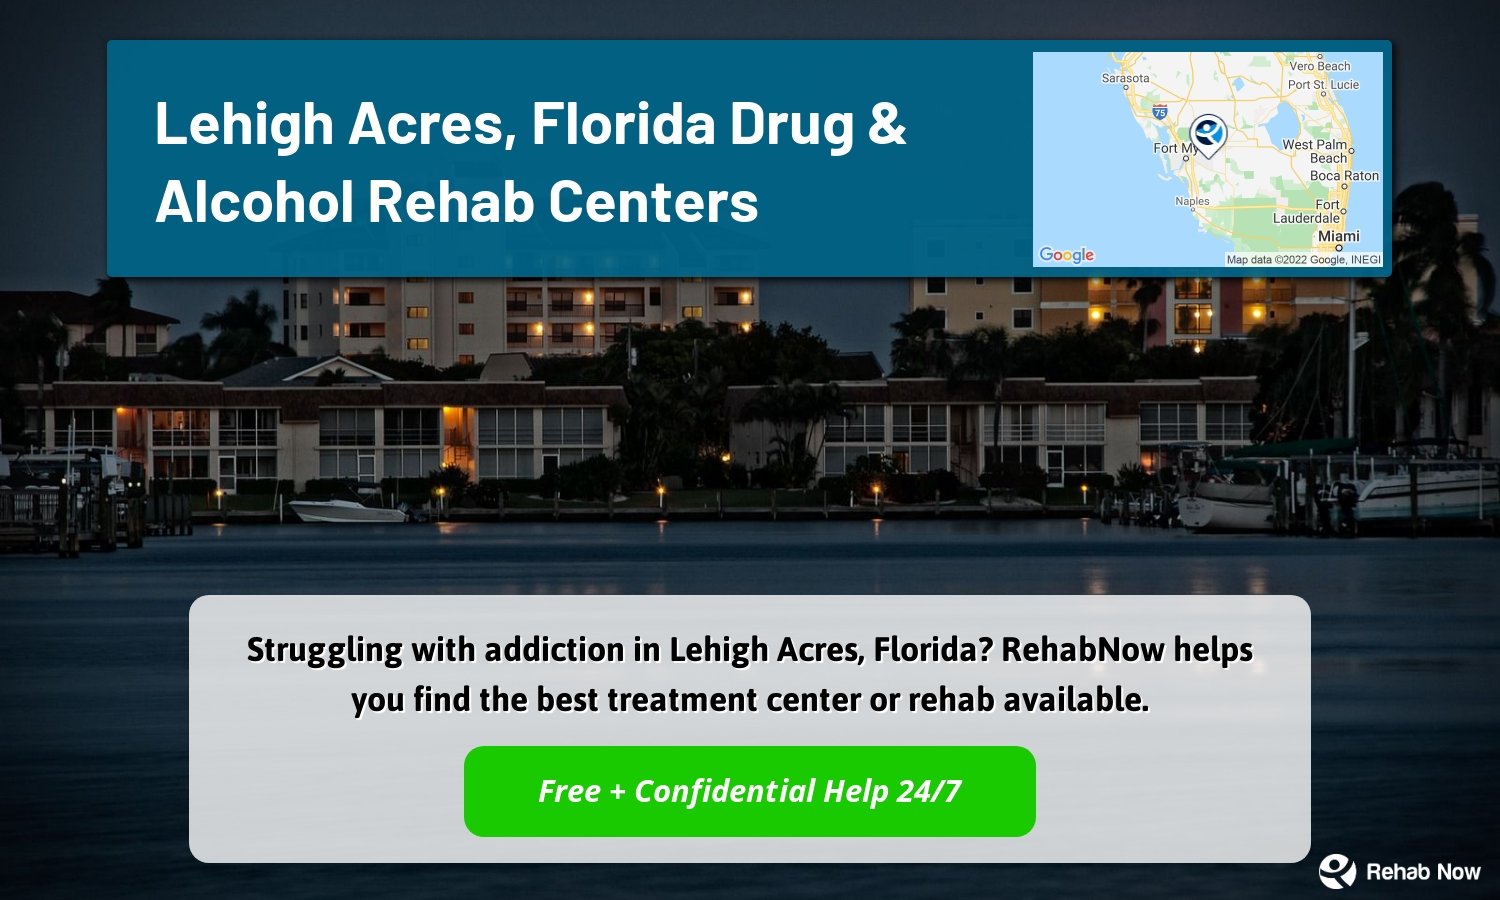 Struggling with addiction in Lehigh Acres, Florida? RehabNow helps you find the best treatment center or rehab available.